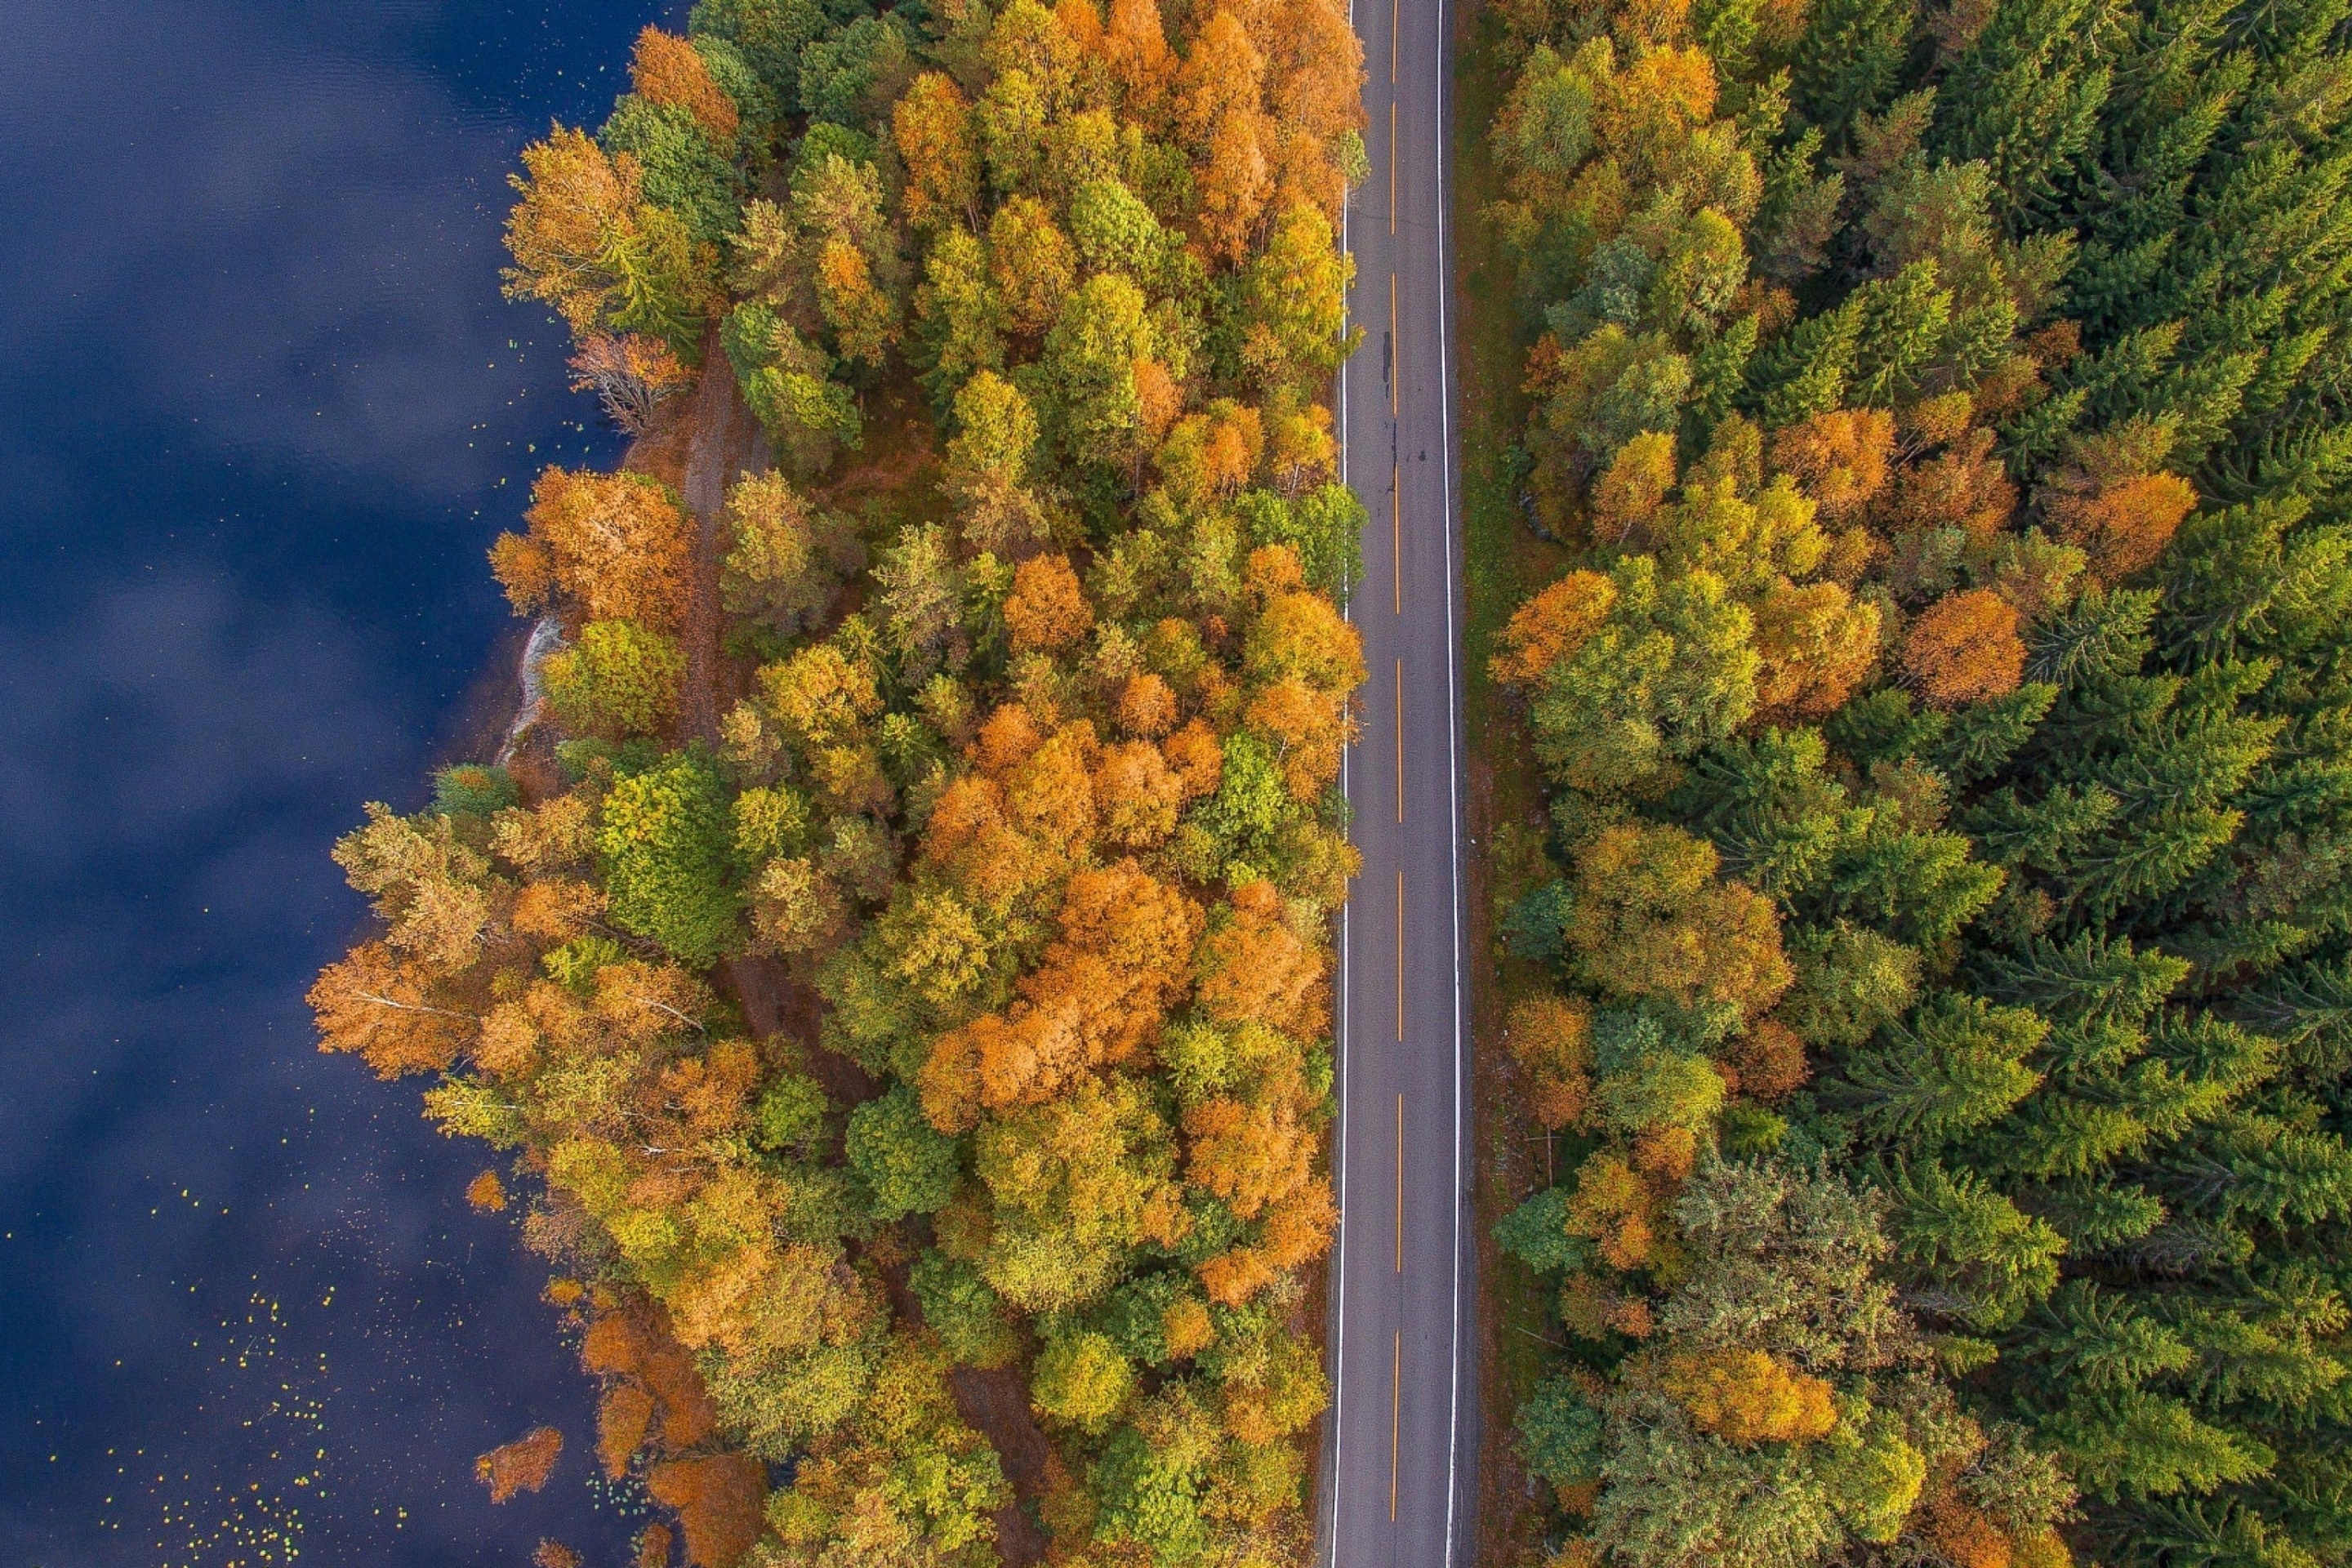 Drone photo of autumn forest screenshot #1 2880x1920